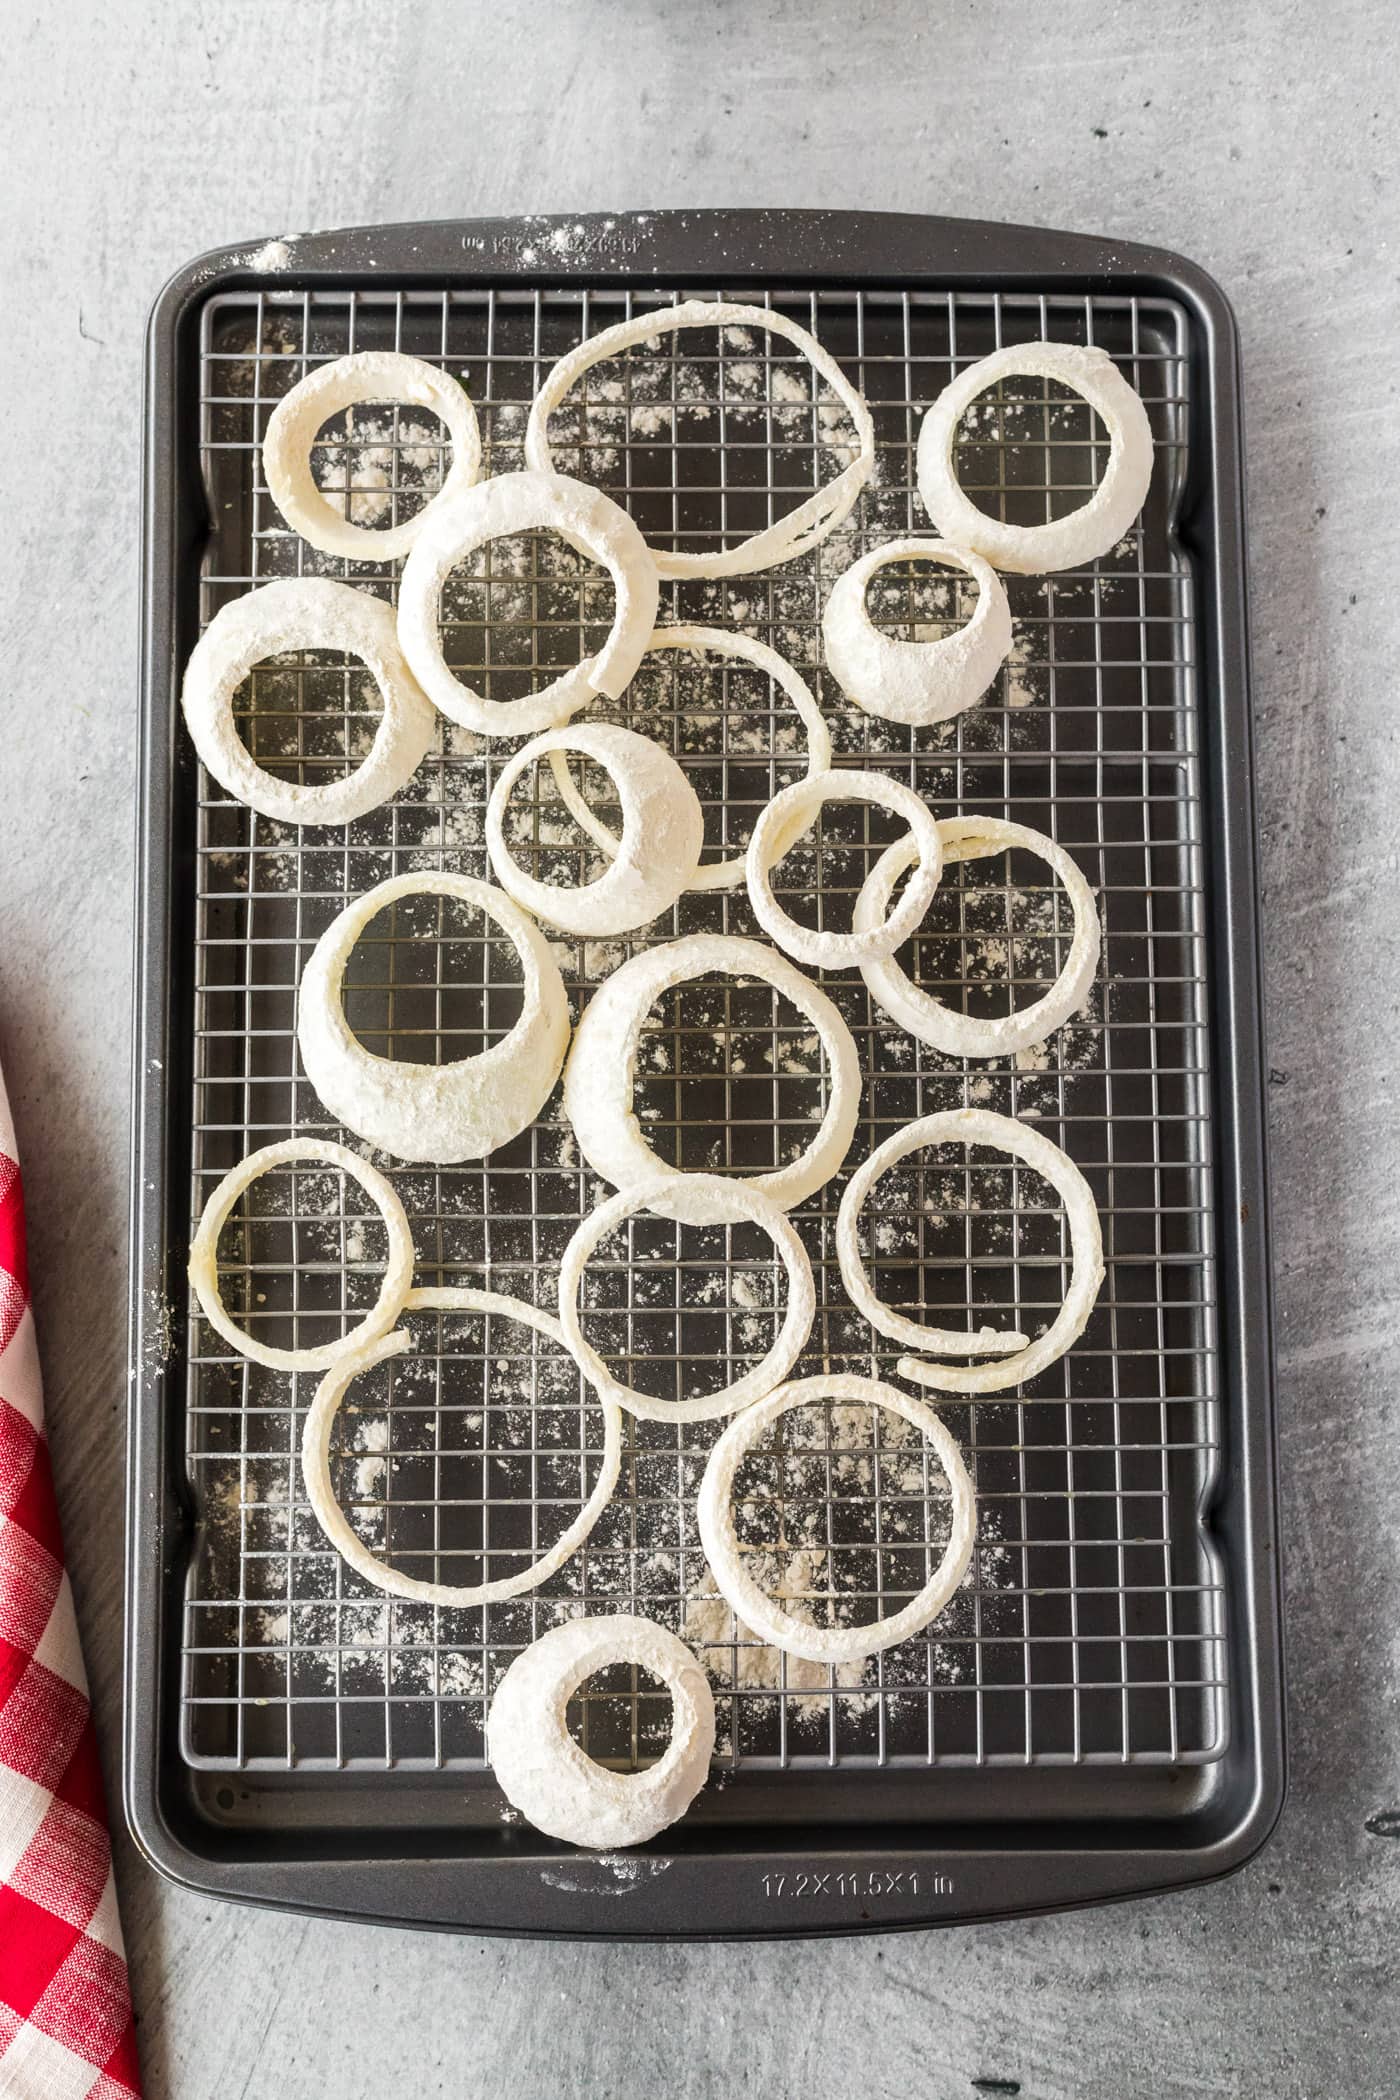 onion rings coating in flour and baking powder